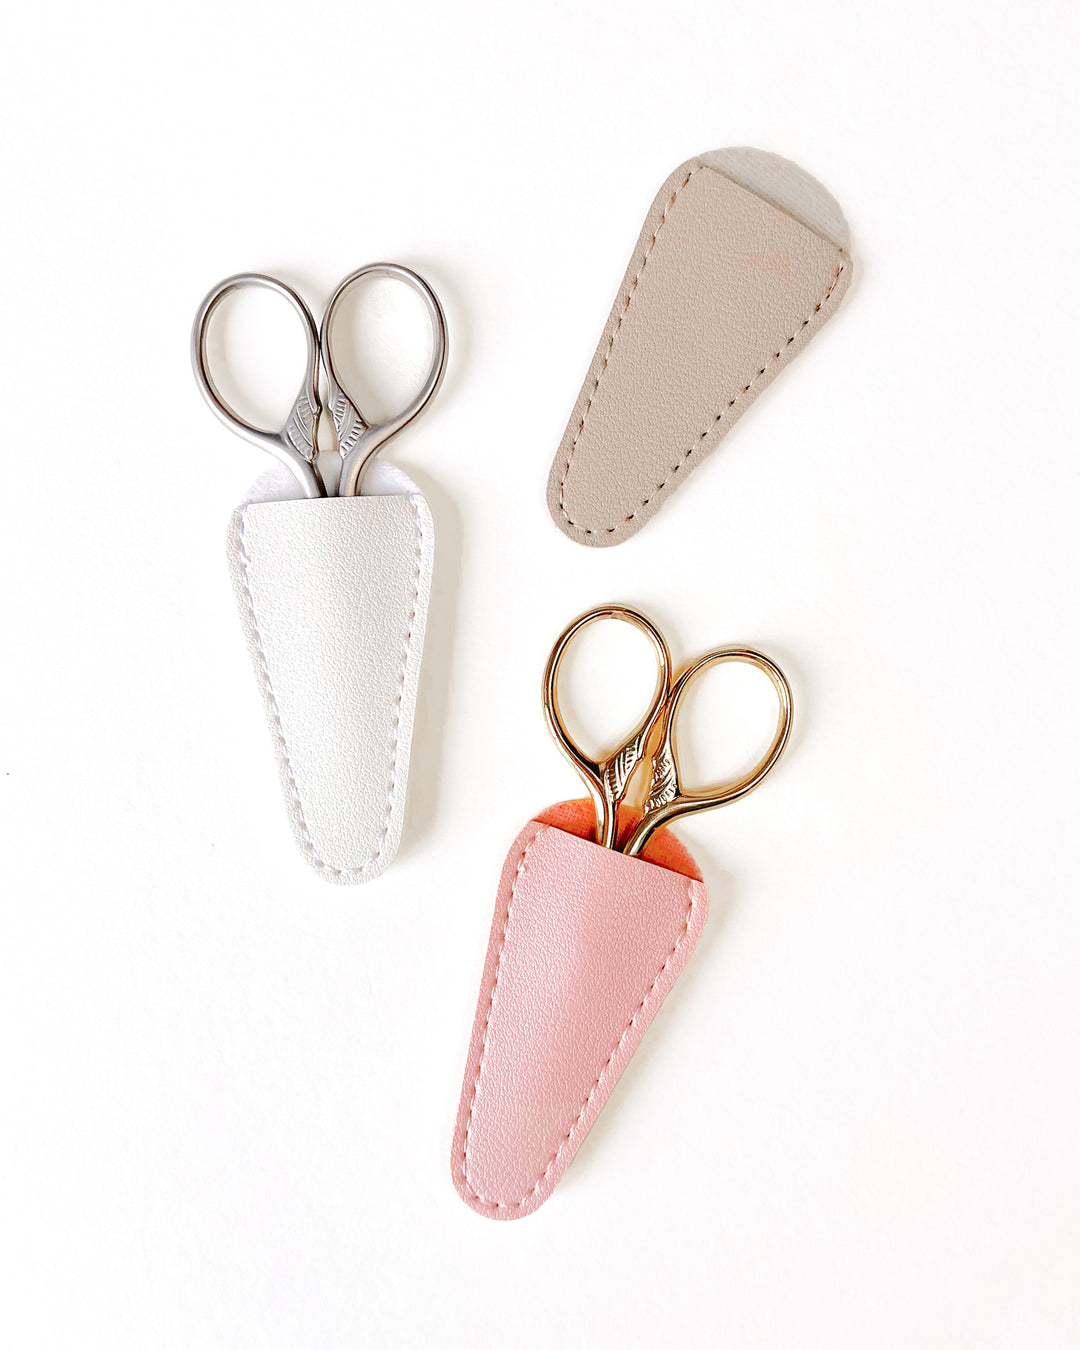 Embroidery Scissors Protective Case by Unwind Studio